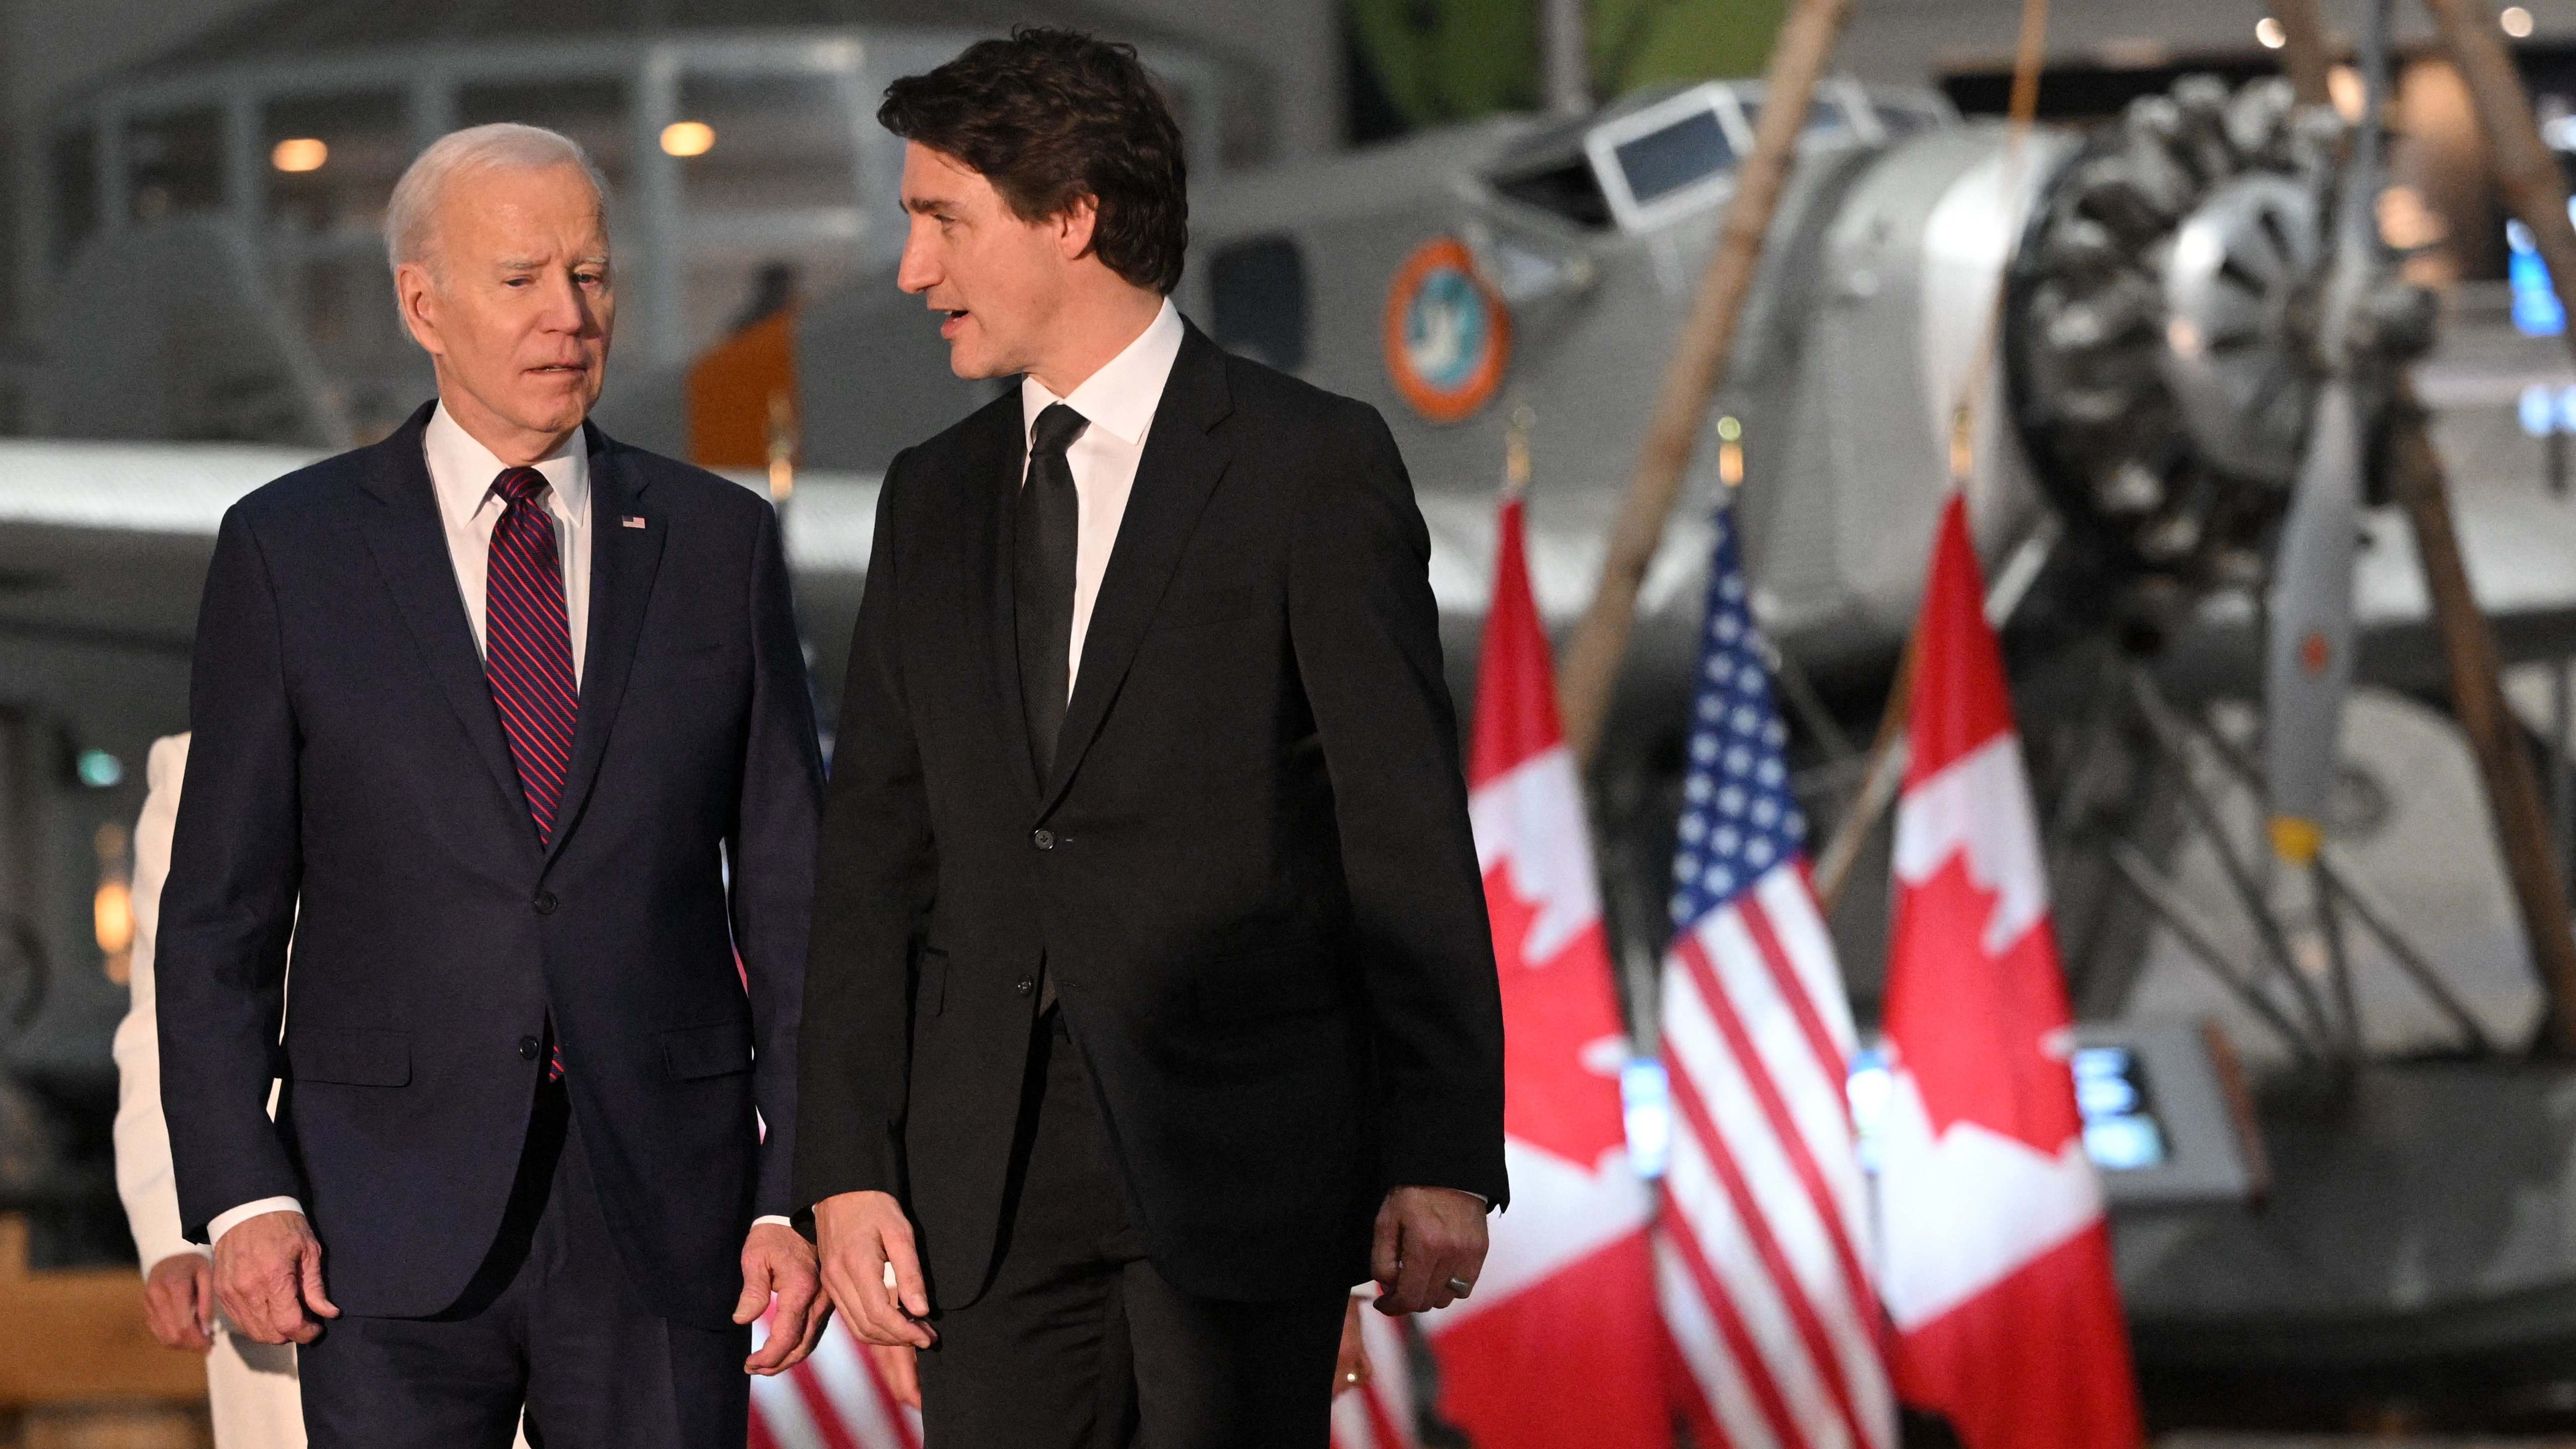 u.s. president joe biden with canadian prime minister justin trudeau walking in front of canadian and u.s. flags. behind is a junkers w34 aircraft